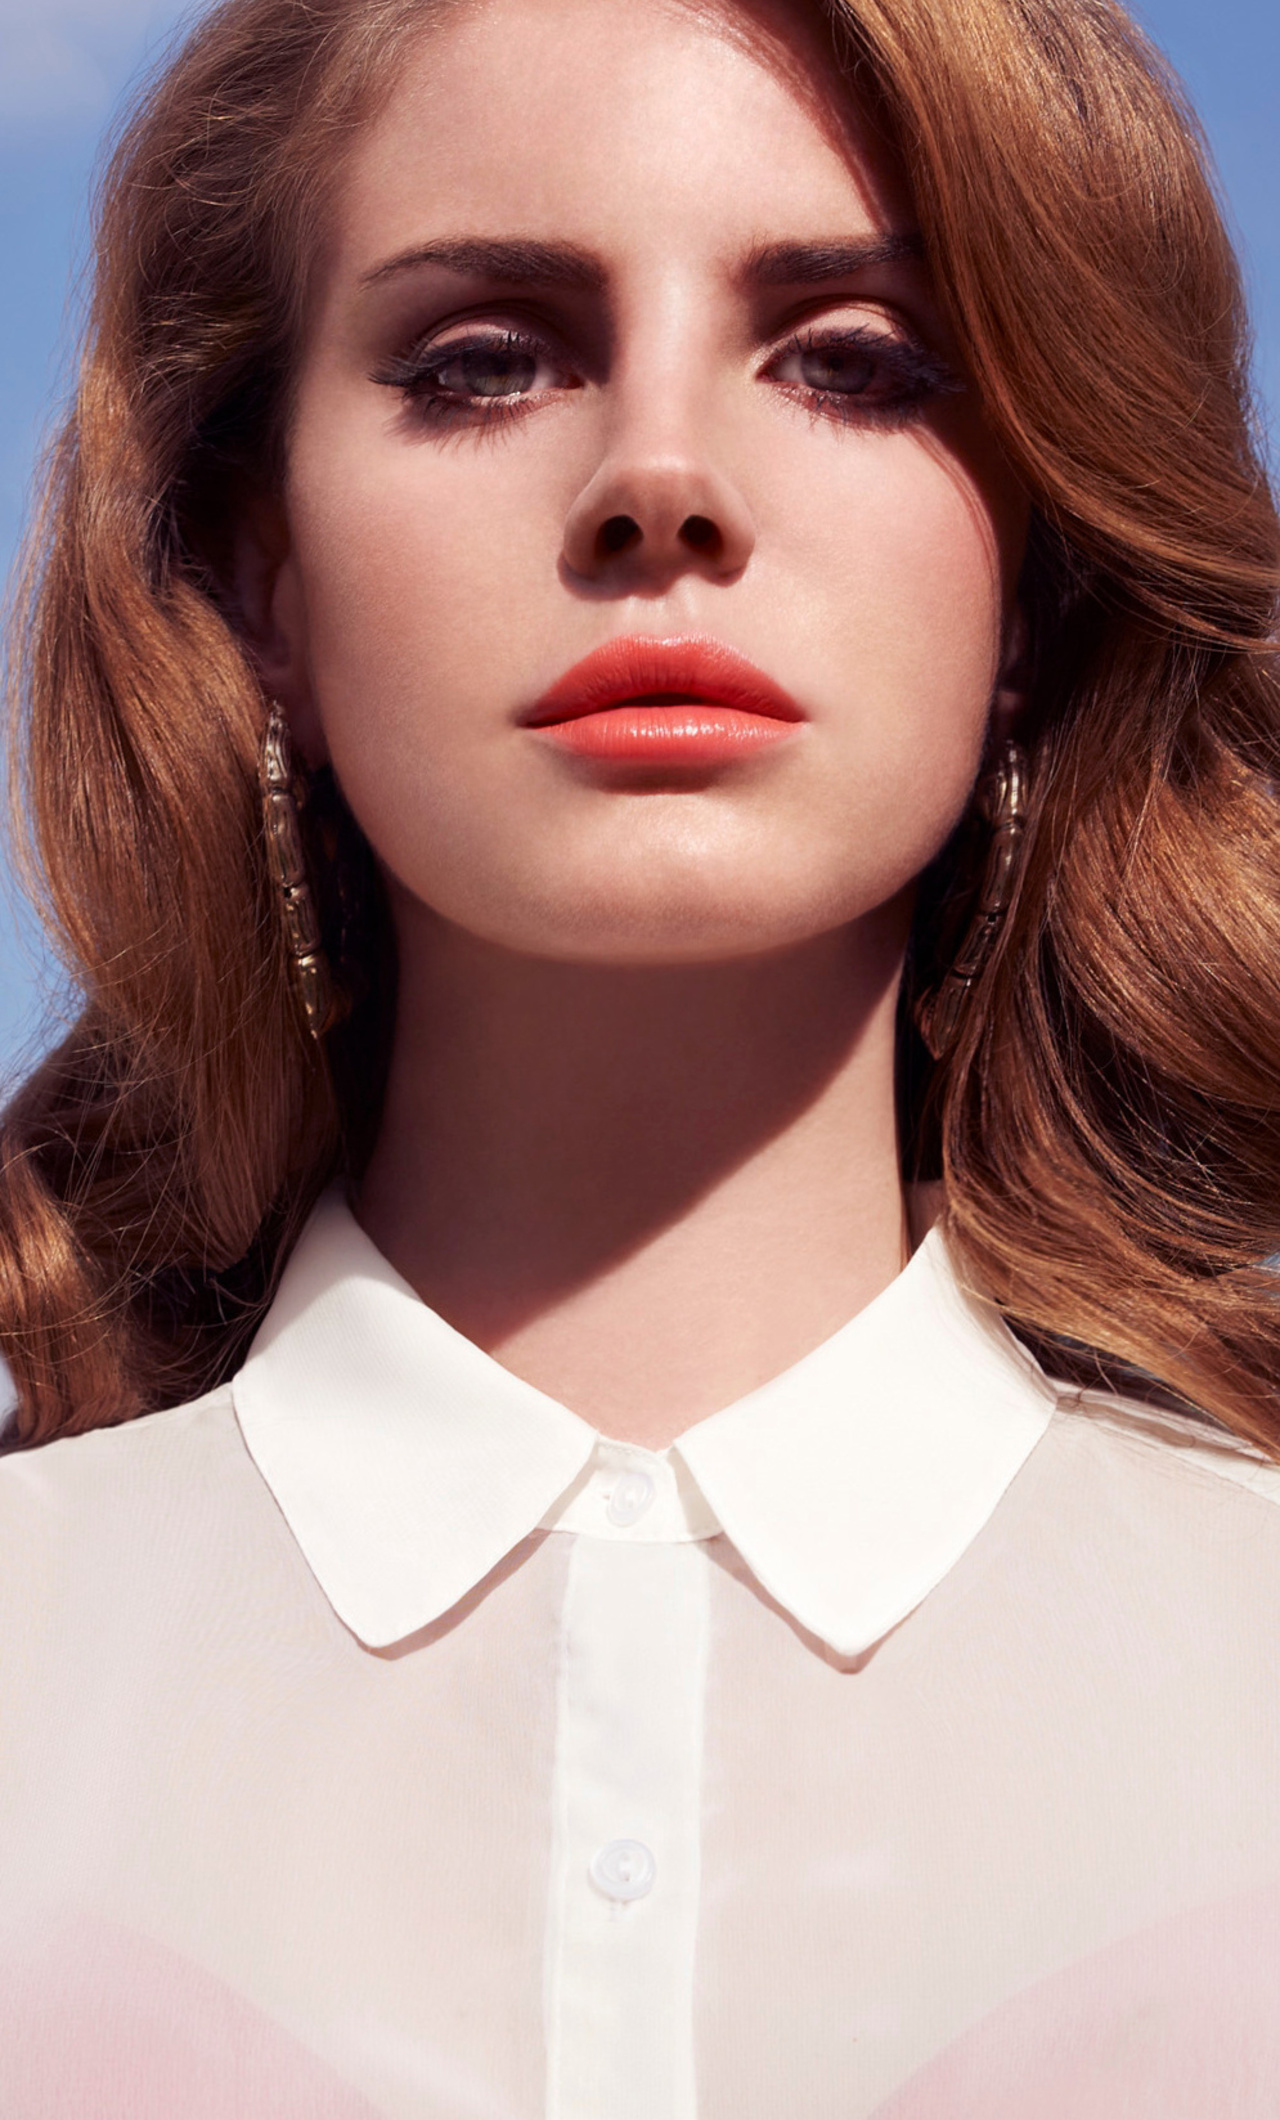 A woman with long hair and red lipstick - Lana Del Rey